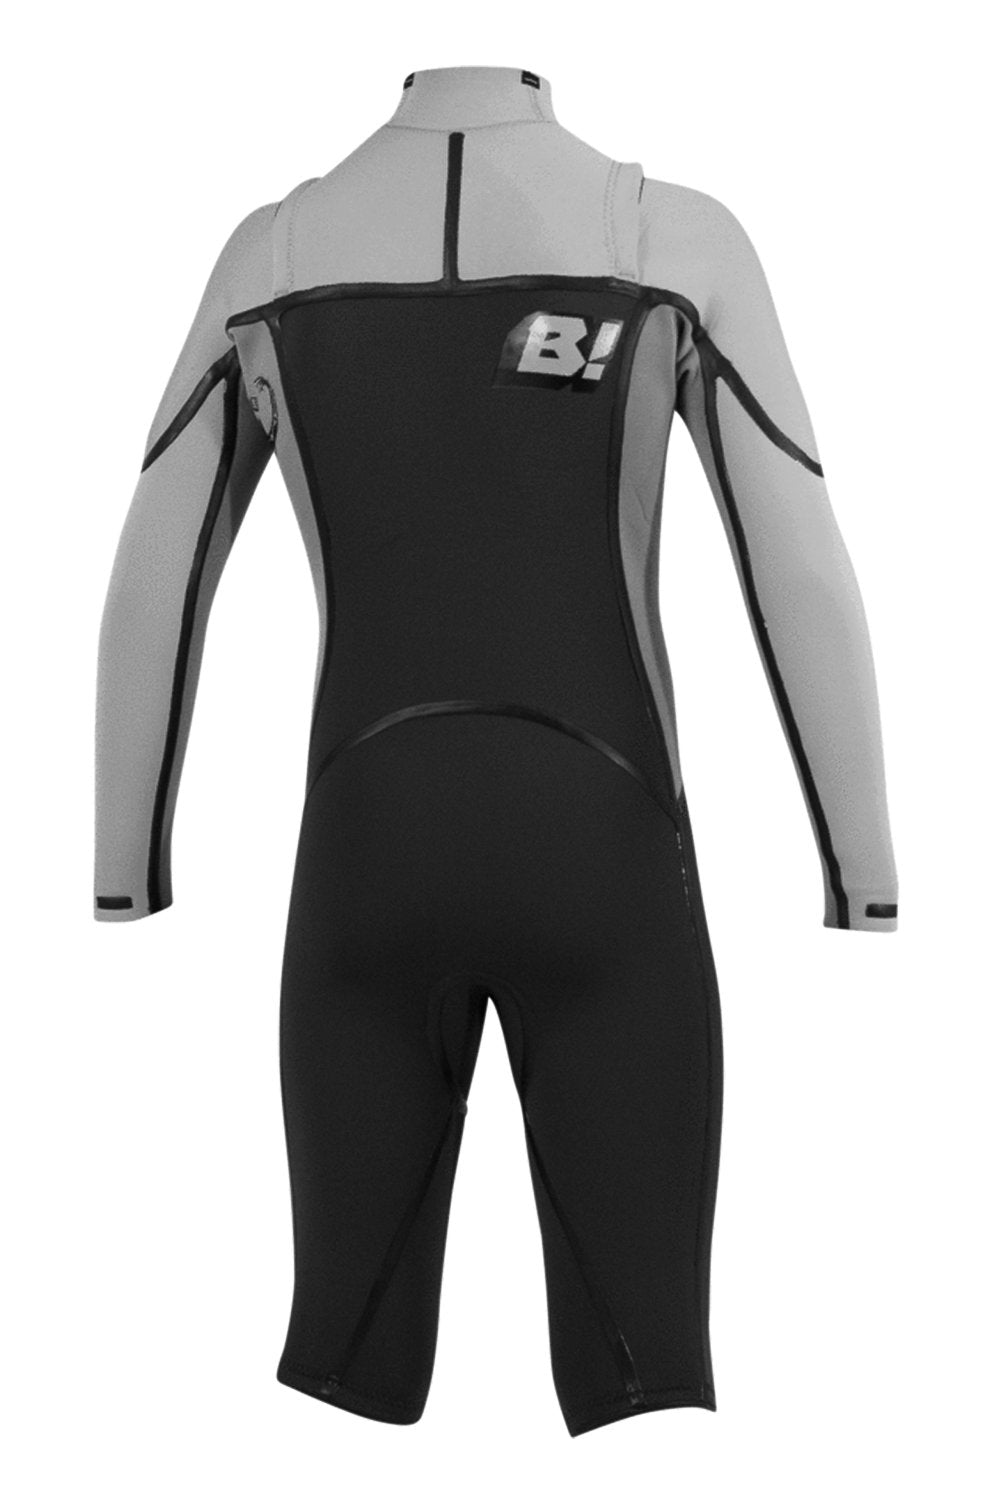 Buell RB1 Long Sleeve Spring